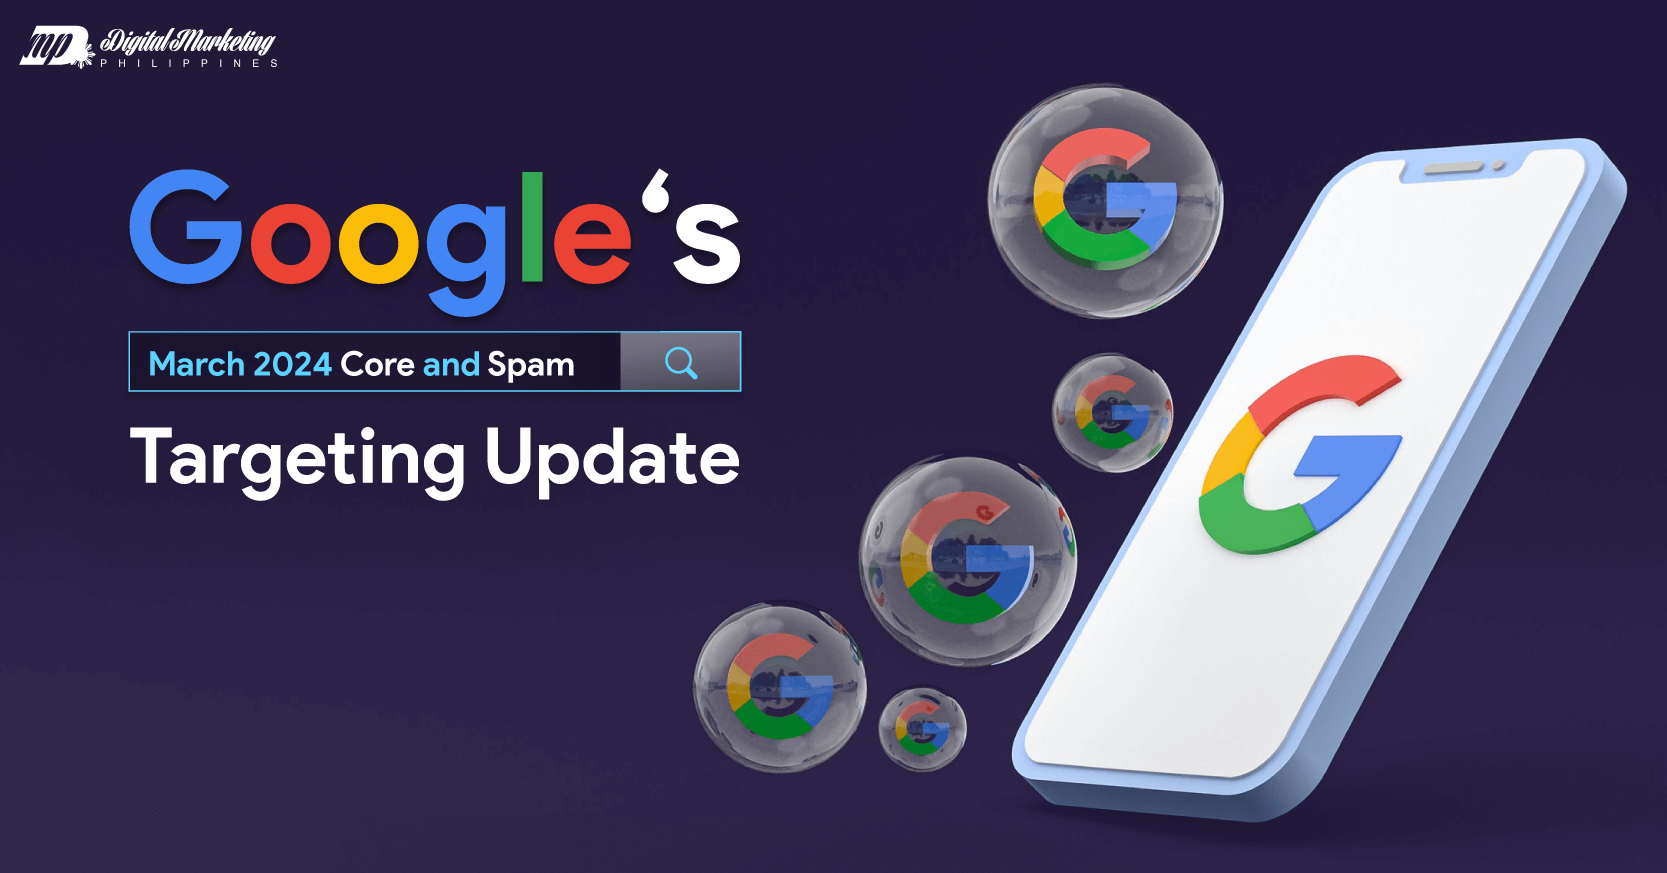 Google's March 2024 Core and Spam Targeting Update featured image